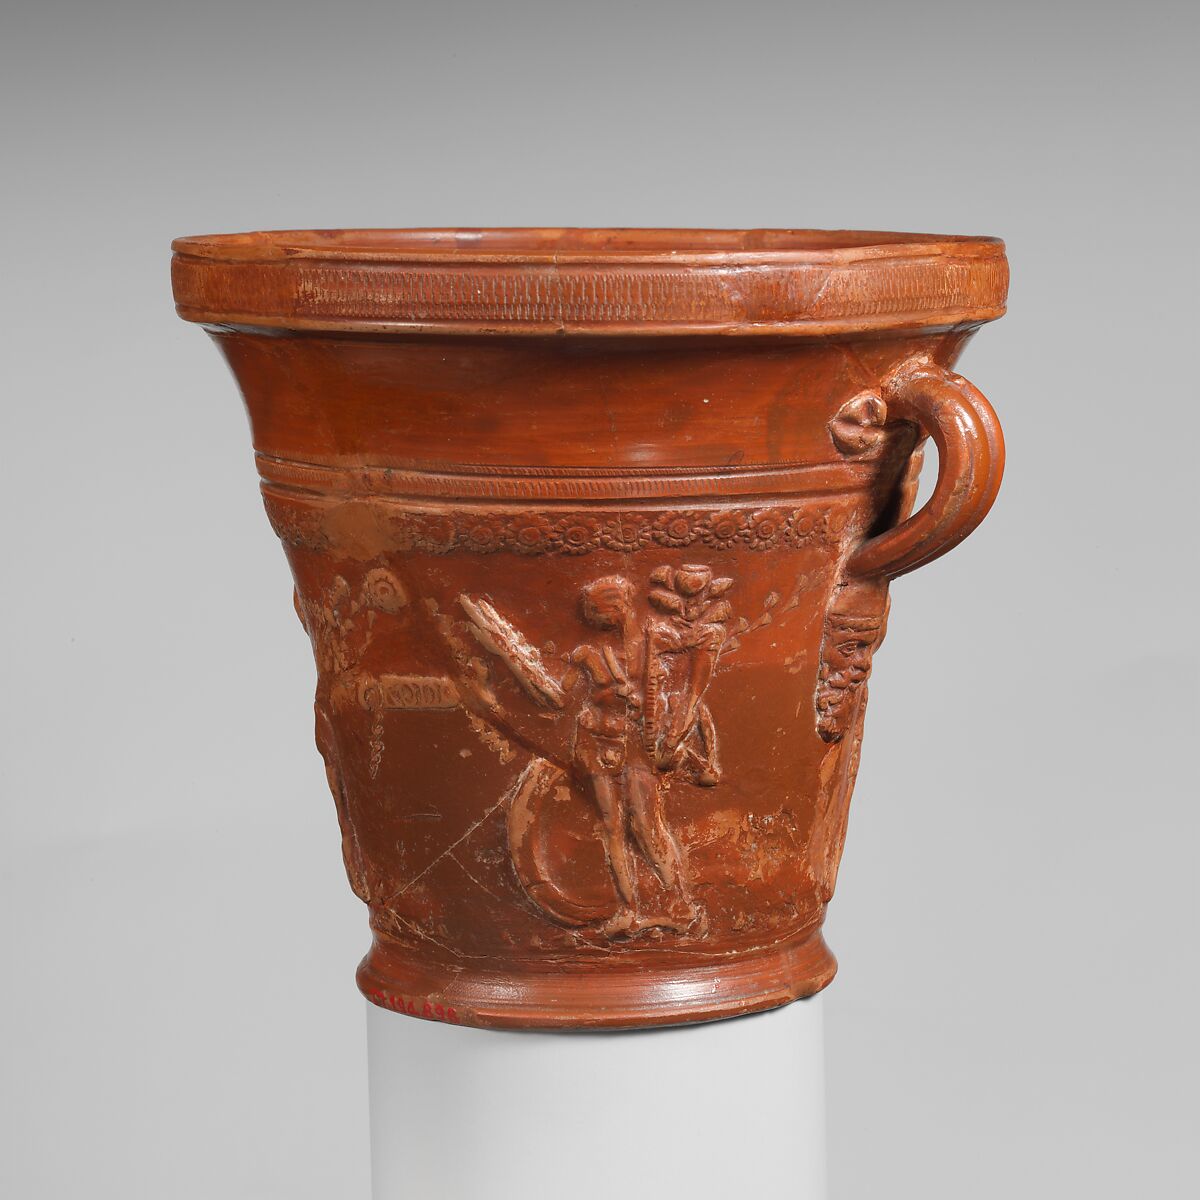 Terracotta modiolus (drinking cup)